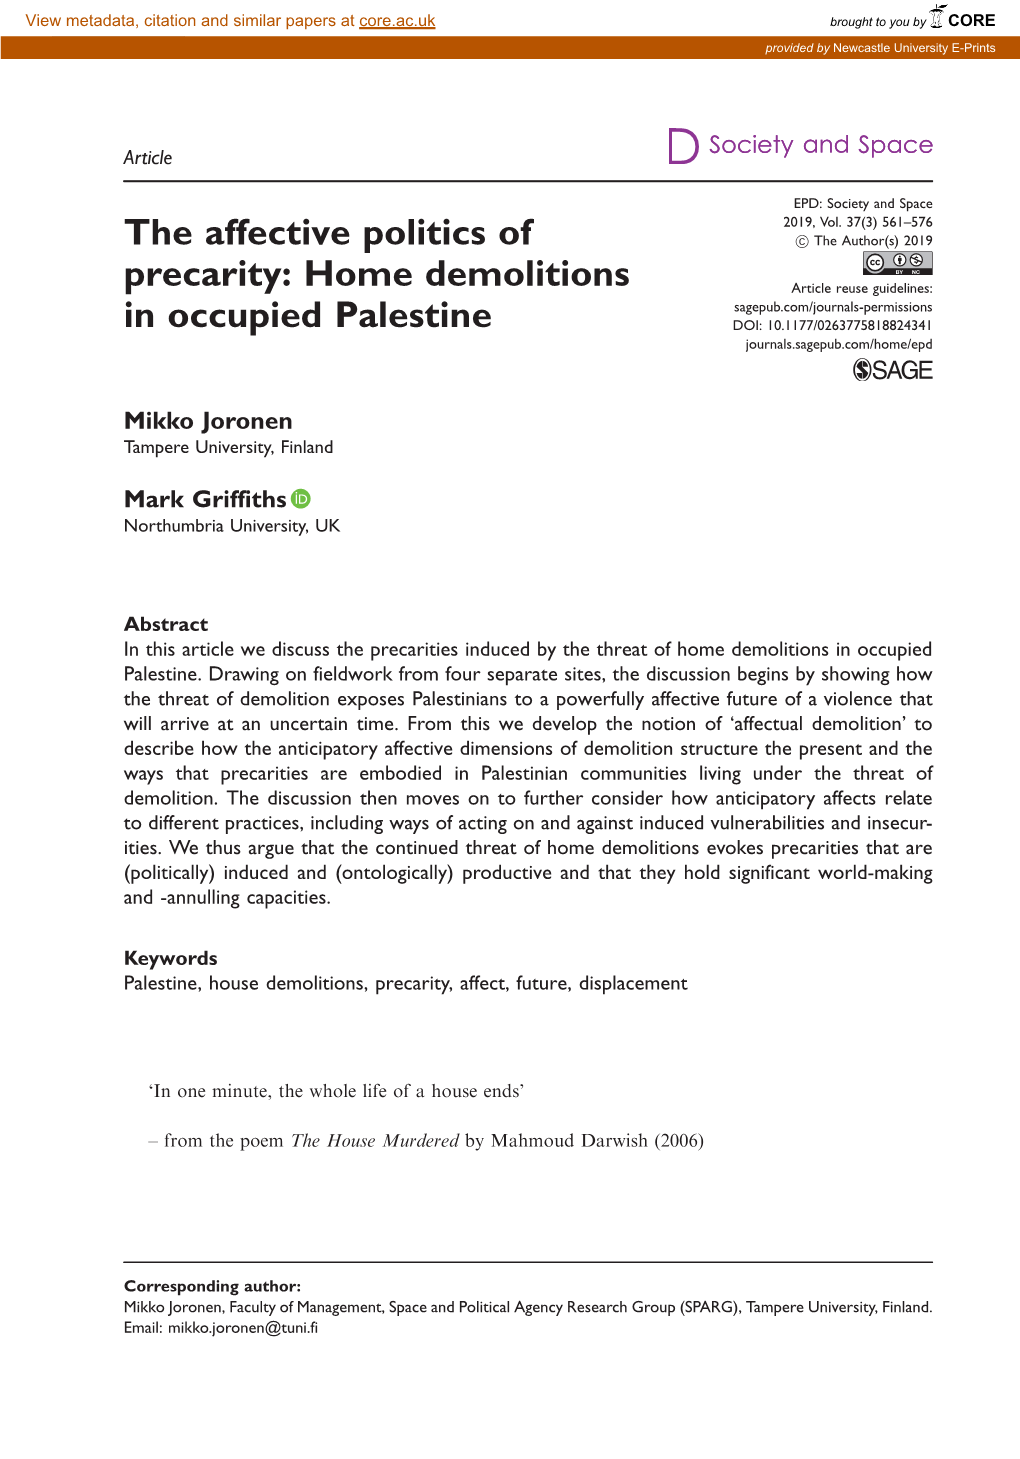 The Affective Politics of Precarity: Home Demolitions in Occupied